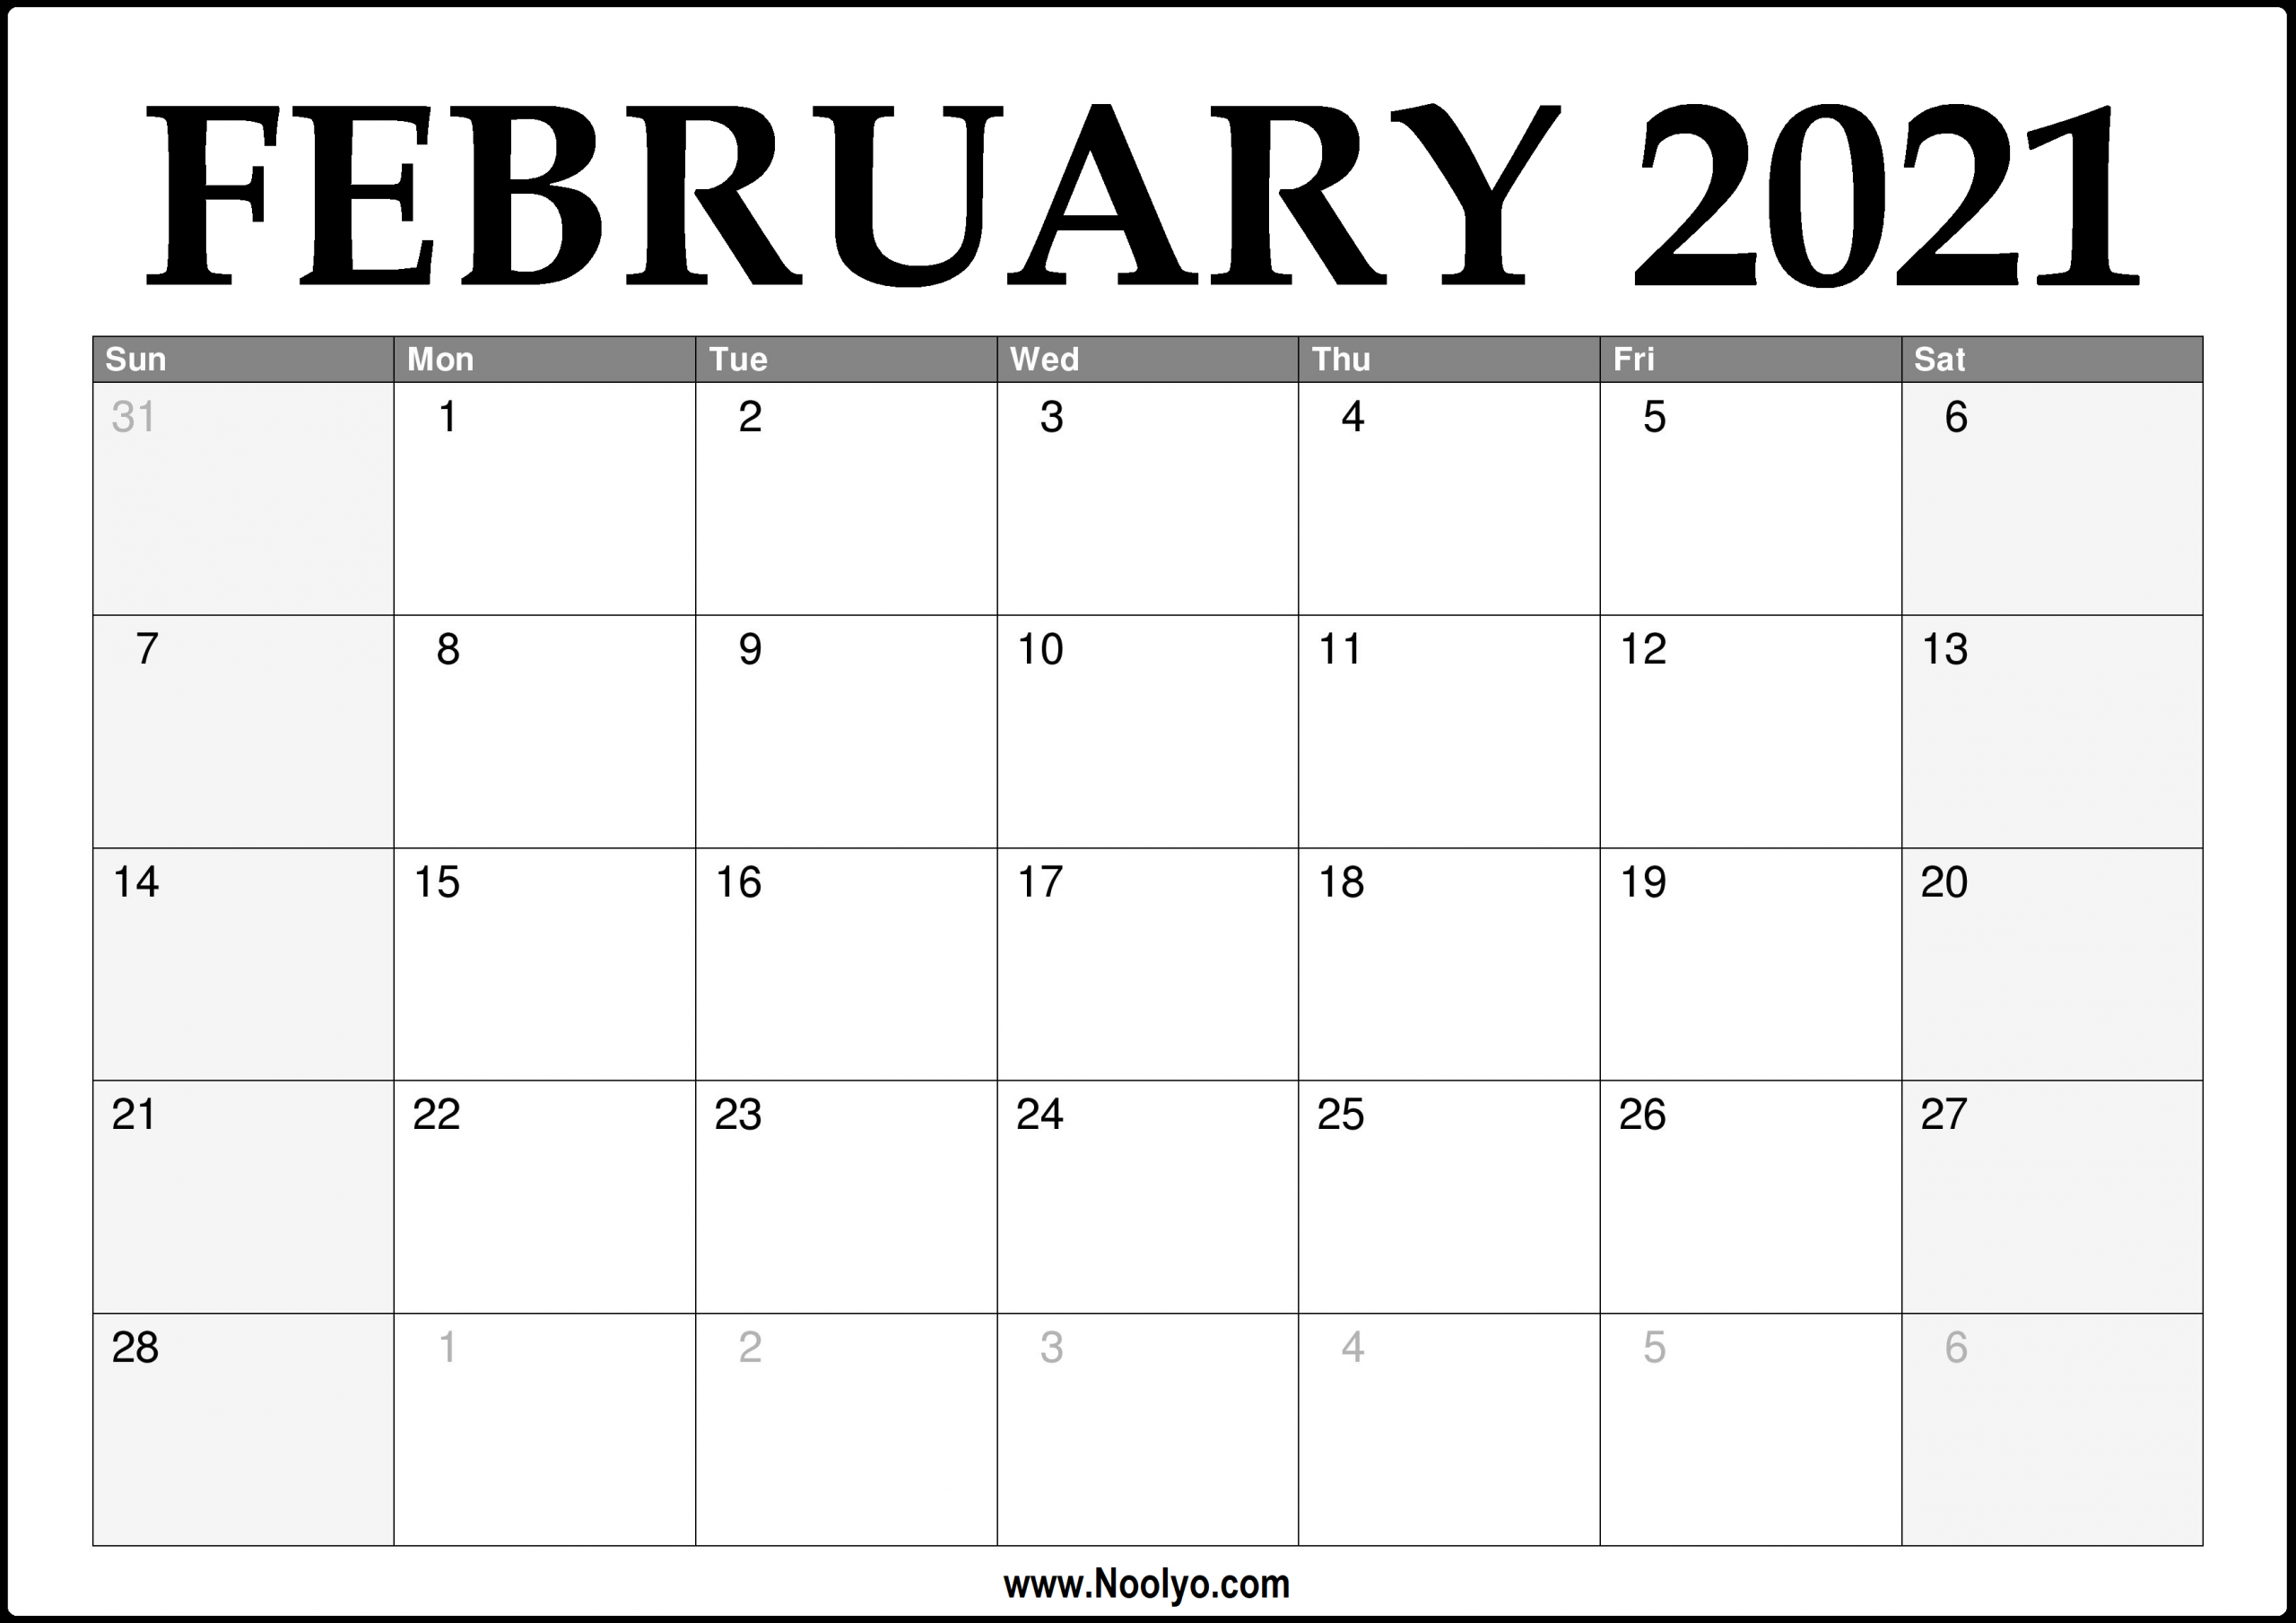 30 free february 2021 calendars for home or office